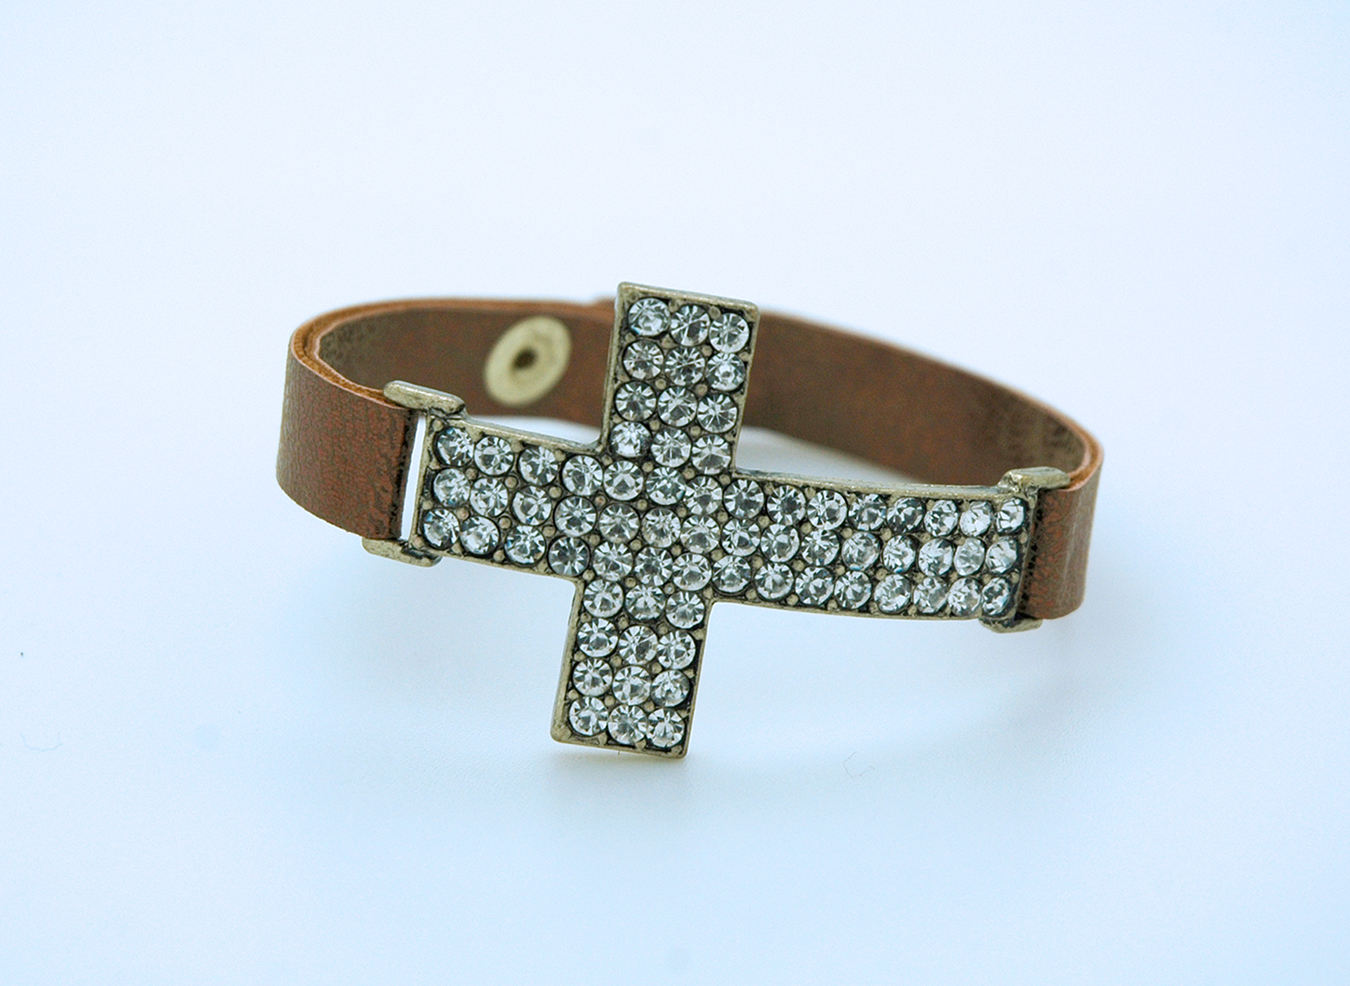 CU1025G - Large Crystal Cross Bracelet on Gold, Faux Leather Band